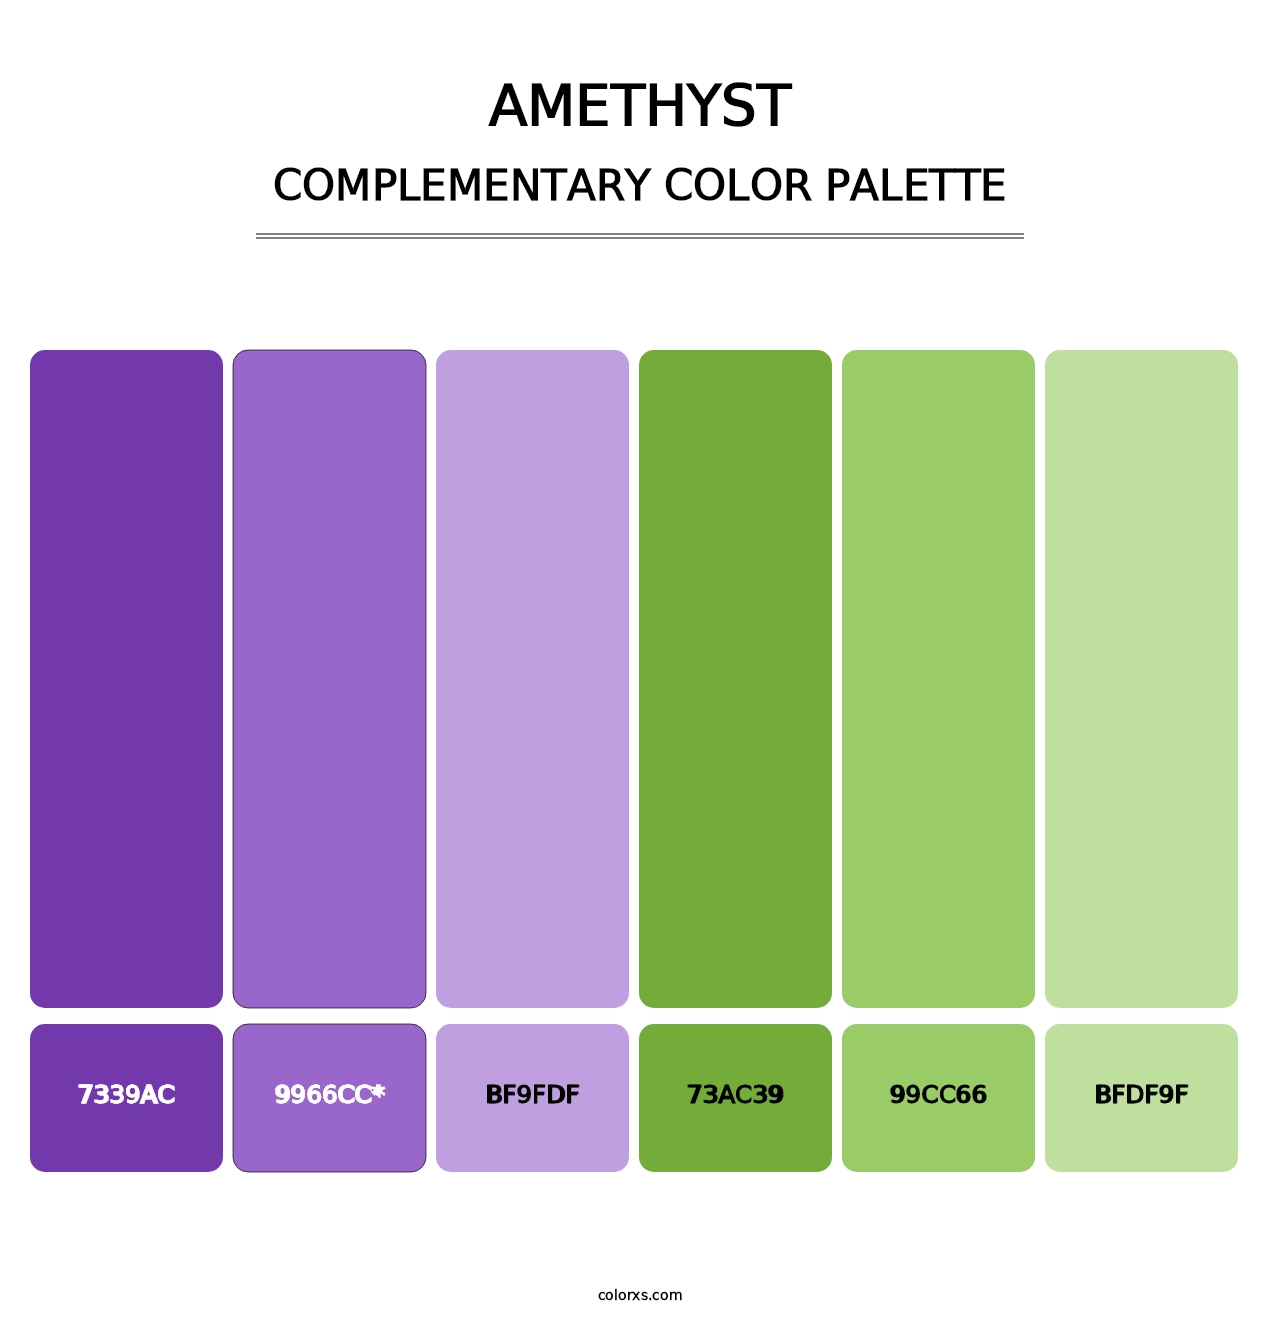 Amethyst - Complementary Color Palette